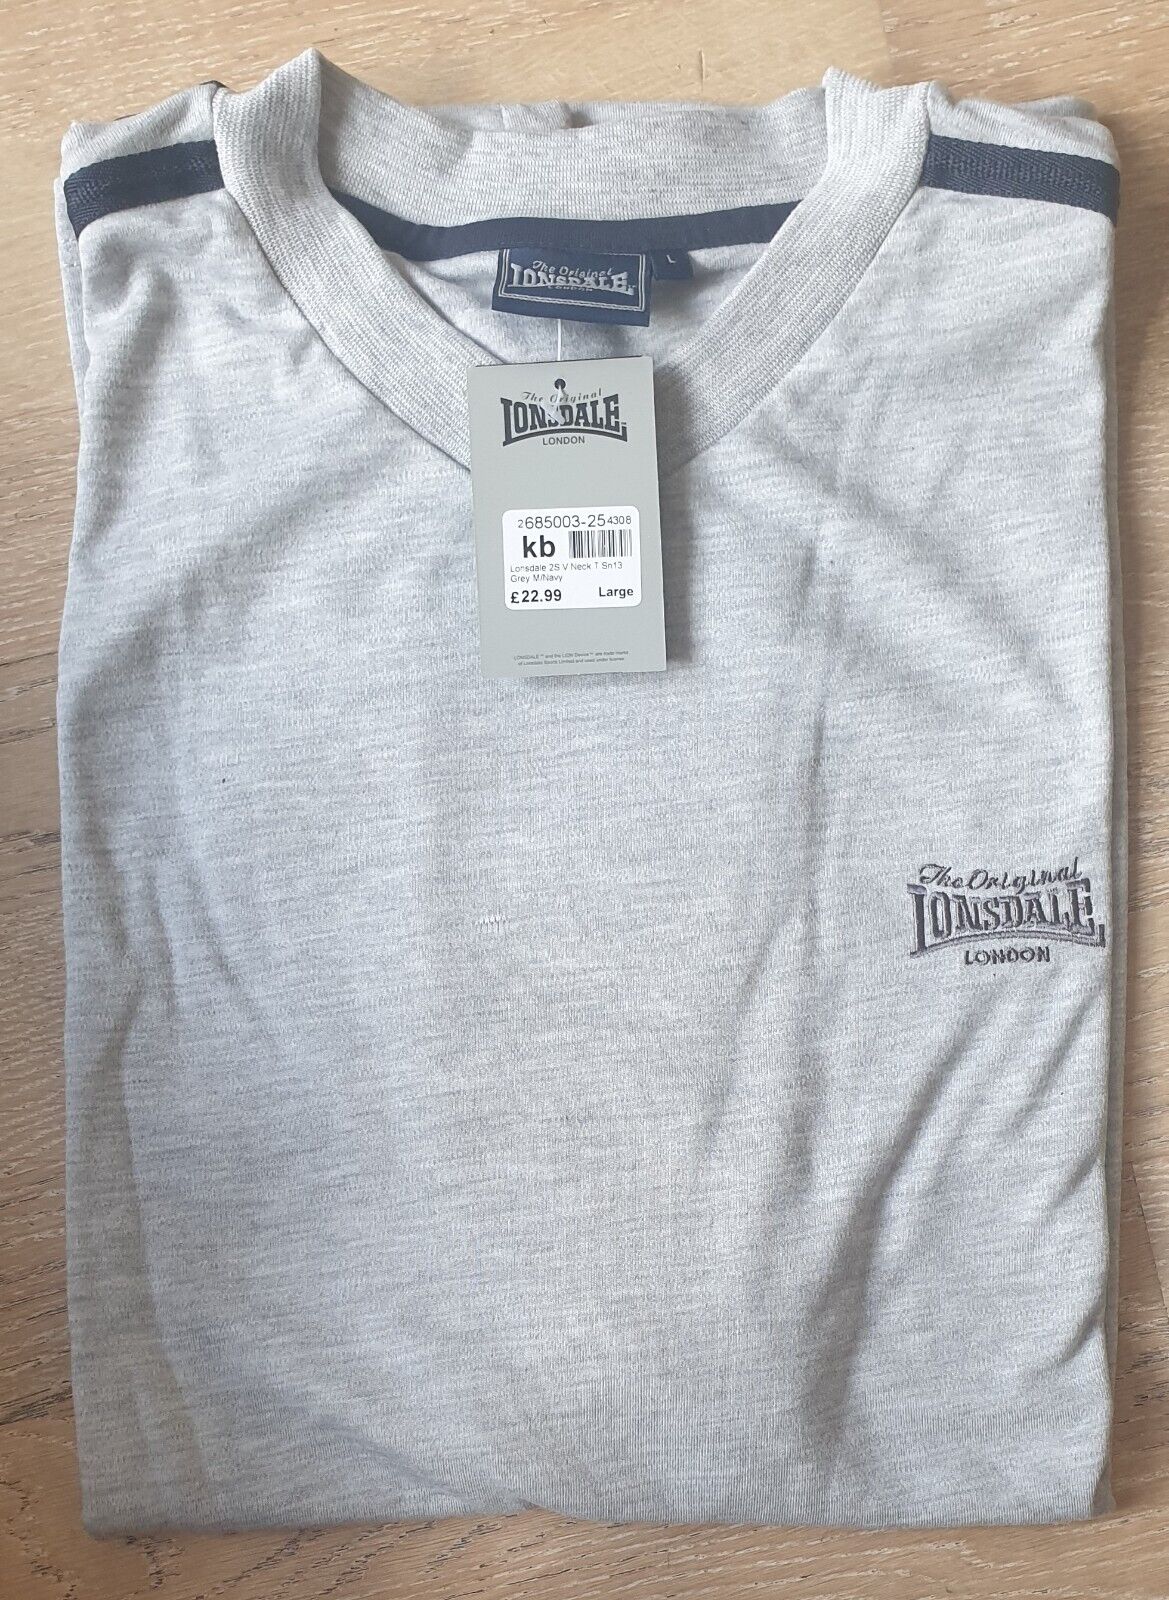 Mens GREY BLUE LONSDALE V NECK T-Shirt RRP £22.99. SUPREME QUALITY CASUAL NEW